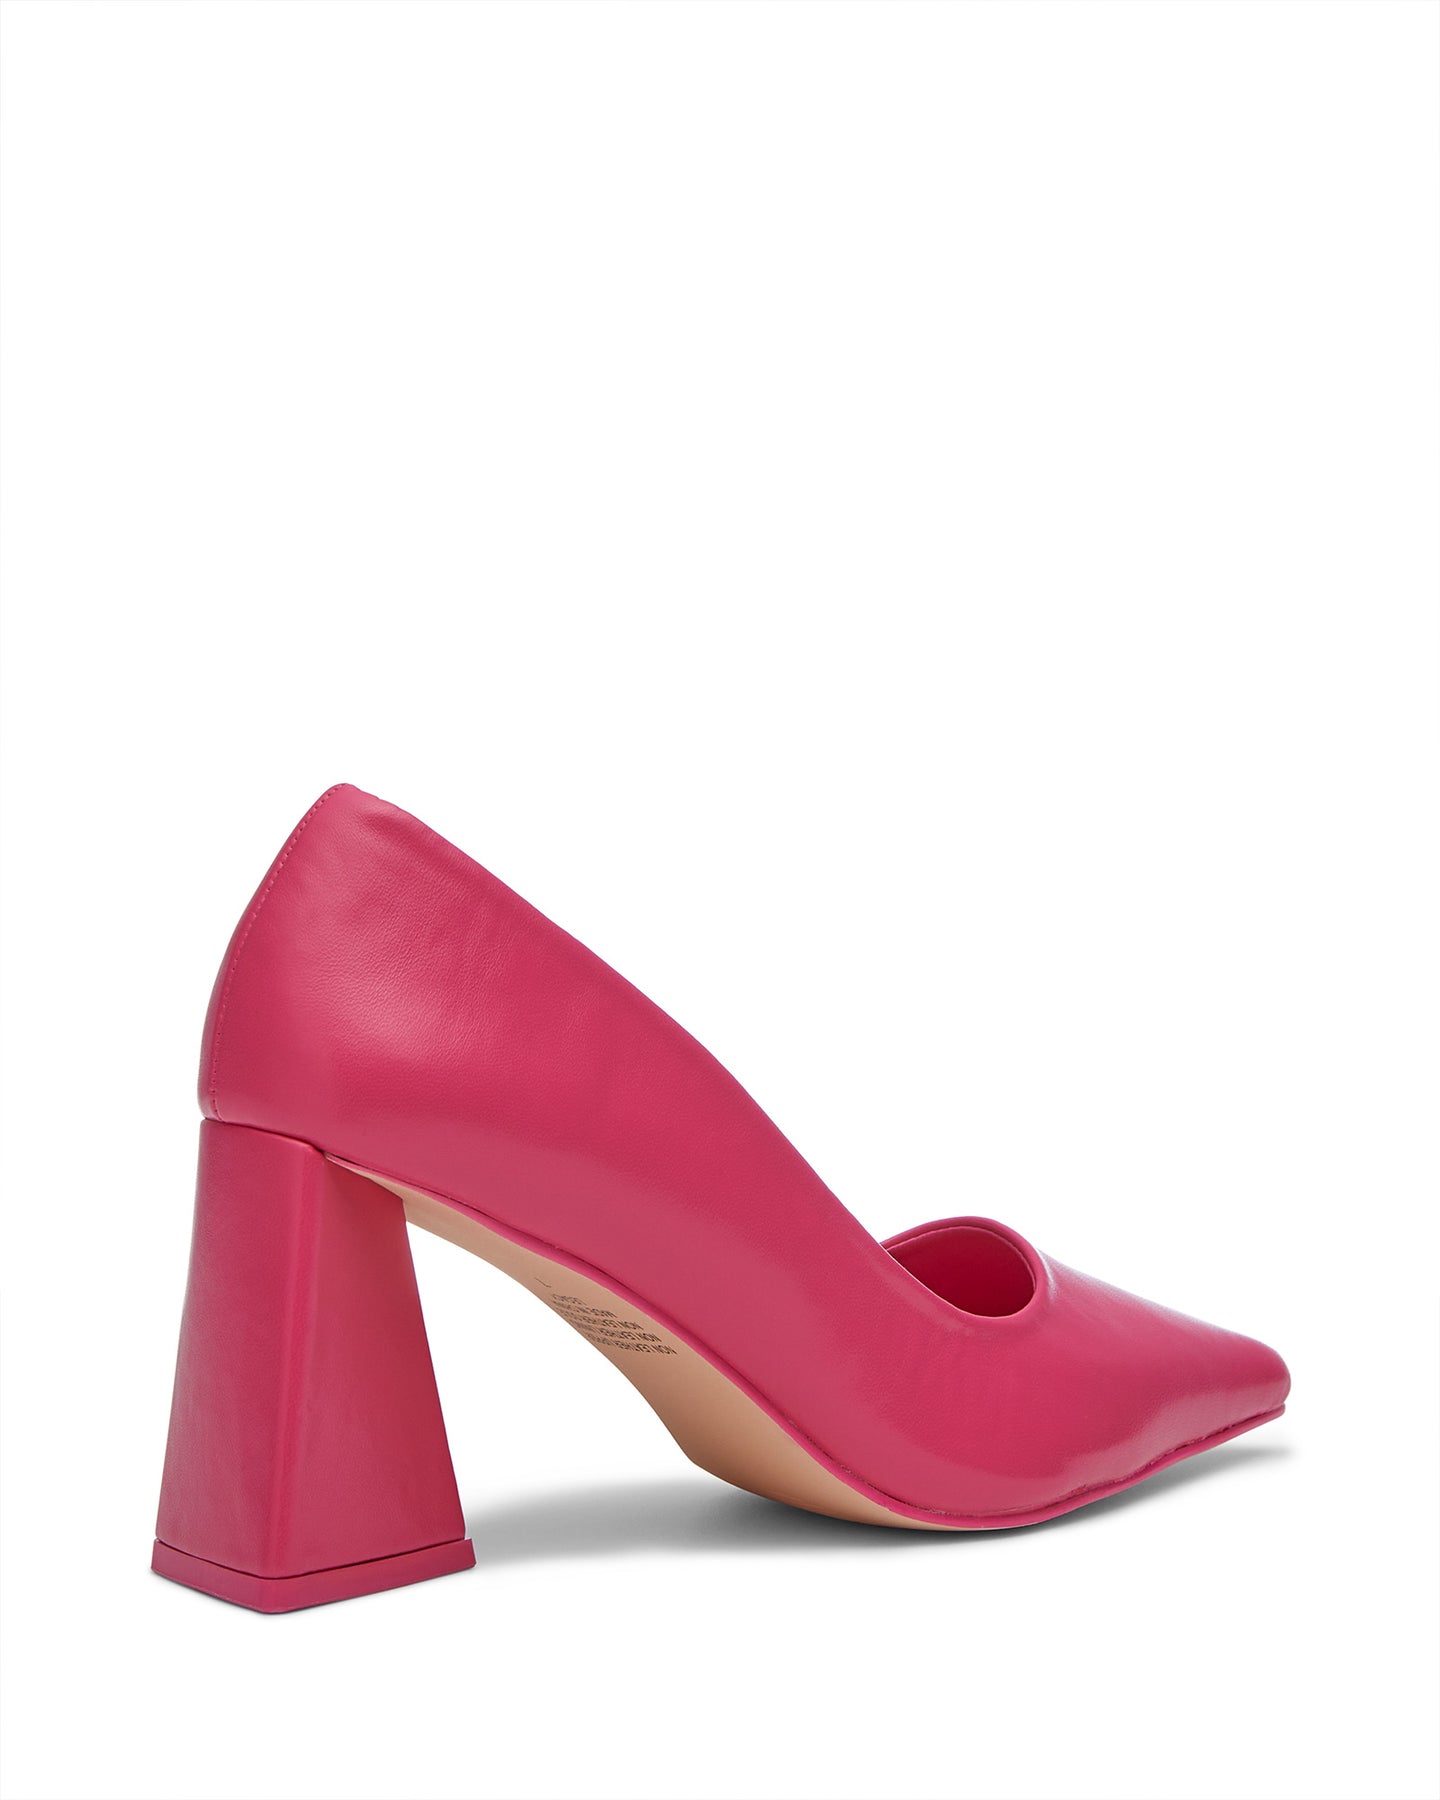 Therapy Shoes Legacy Pink | Women's Heels | Pumps | Office | Block